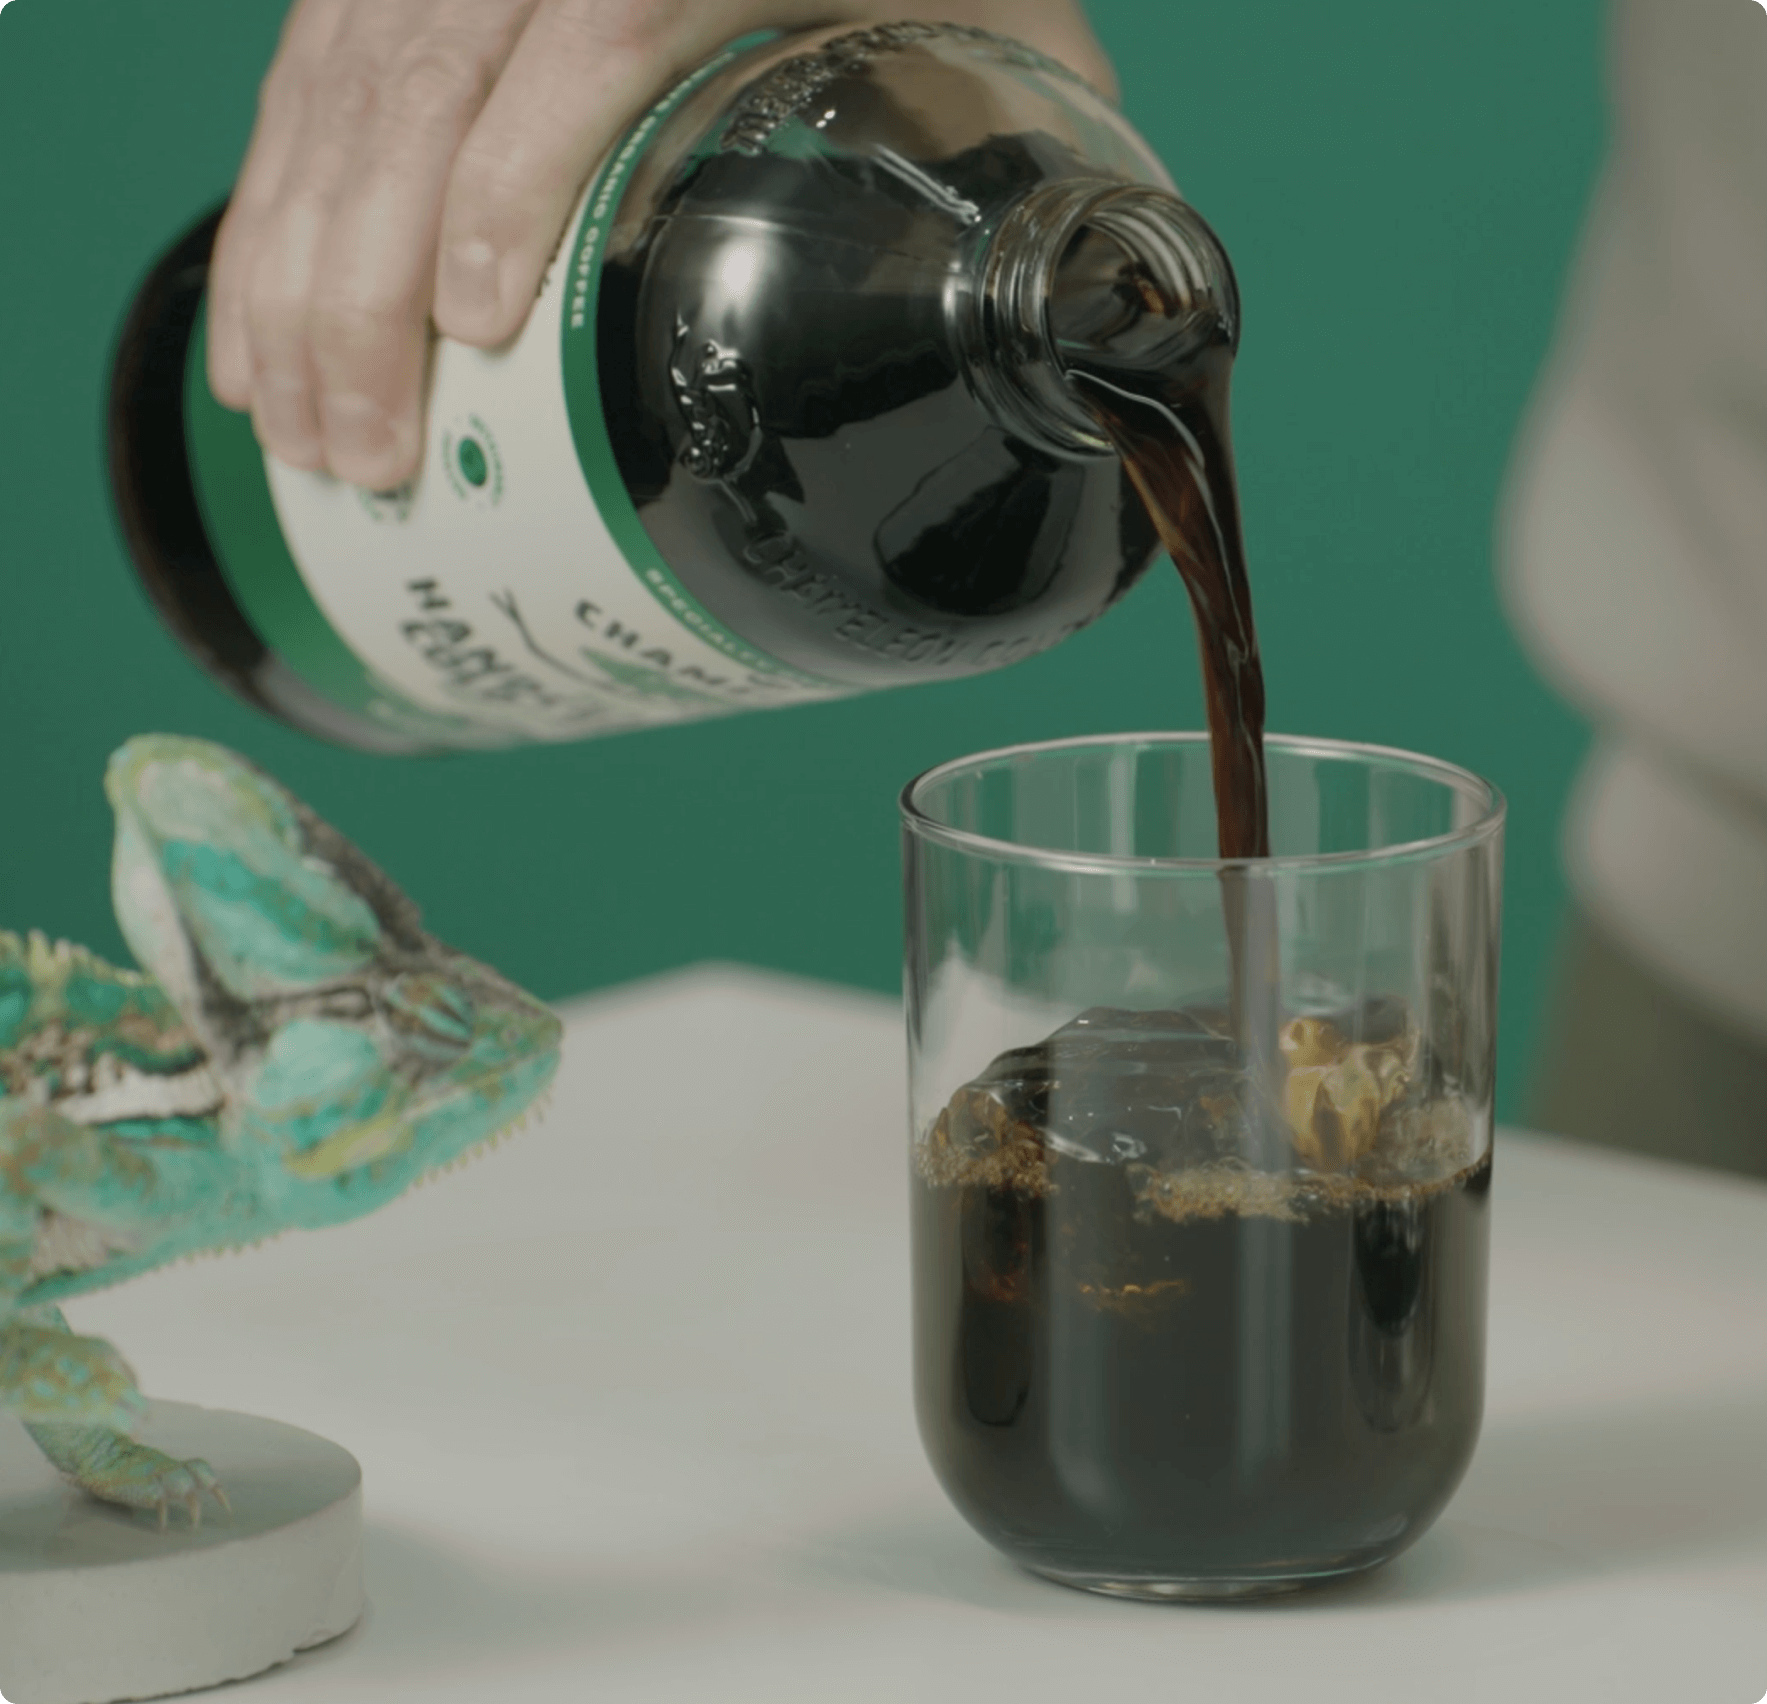 A person pouring coffee into a glass with a lizard perched on top, creating a unique and unexpected scene.